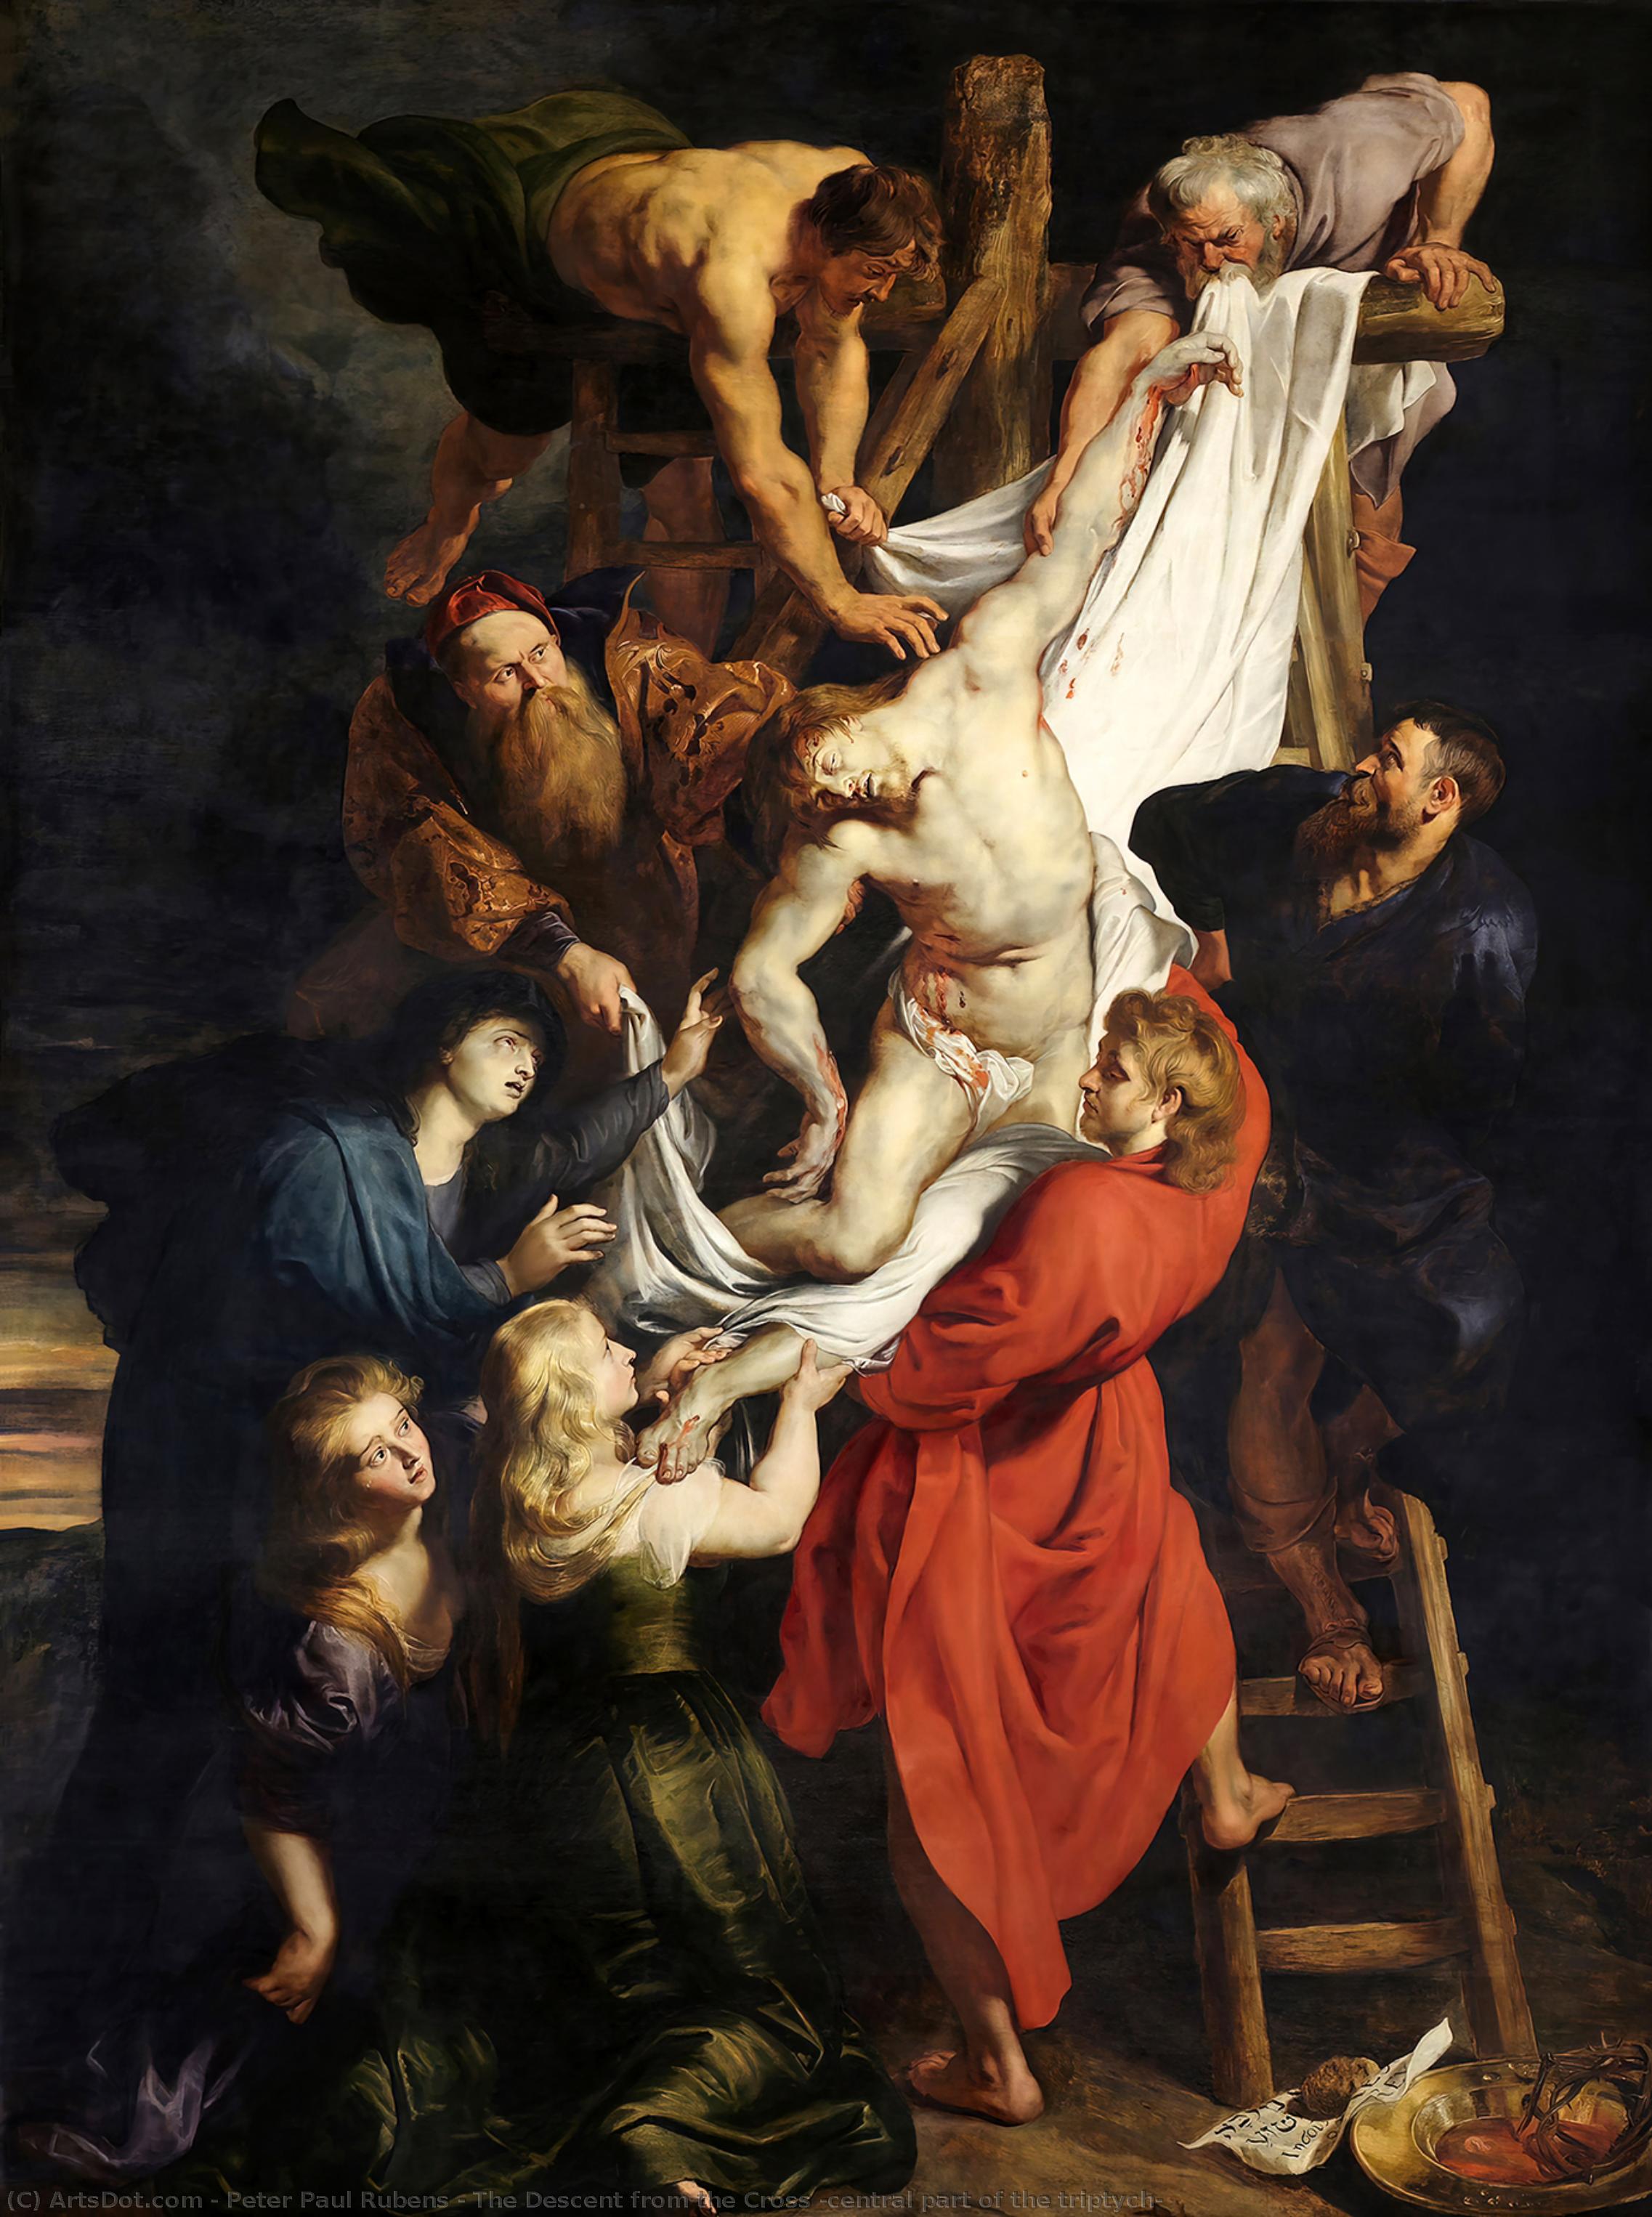 WikiOO.org - Encyclopedia of Fine Arts - Festés, Grafika Peter Paul Rubens - The Descent from the Cross (central part of the triptych)